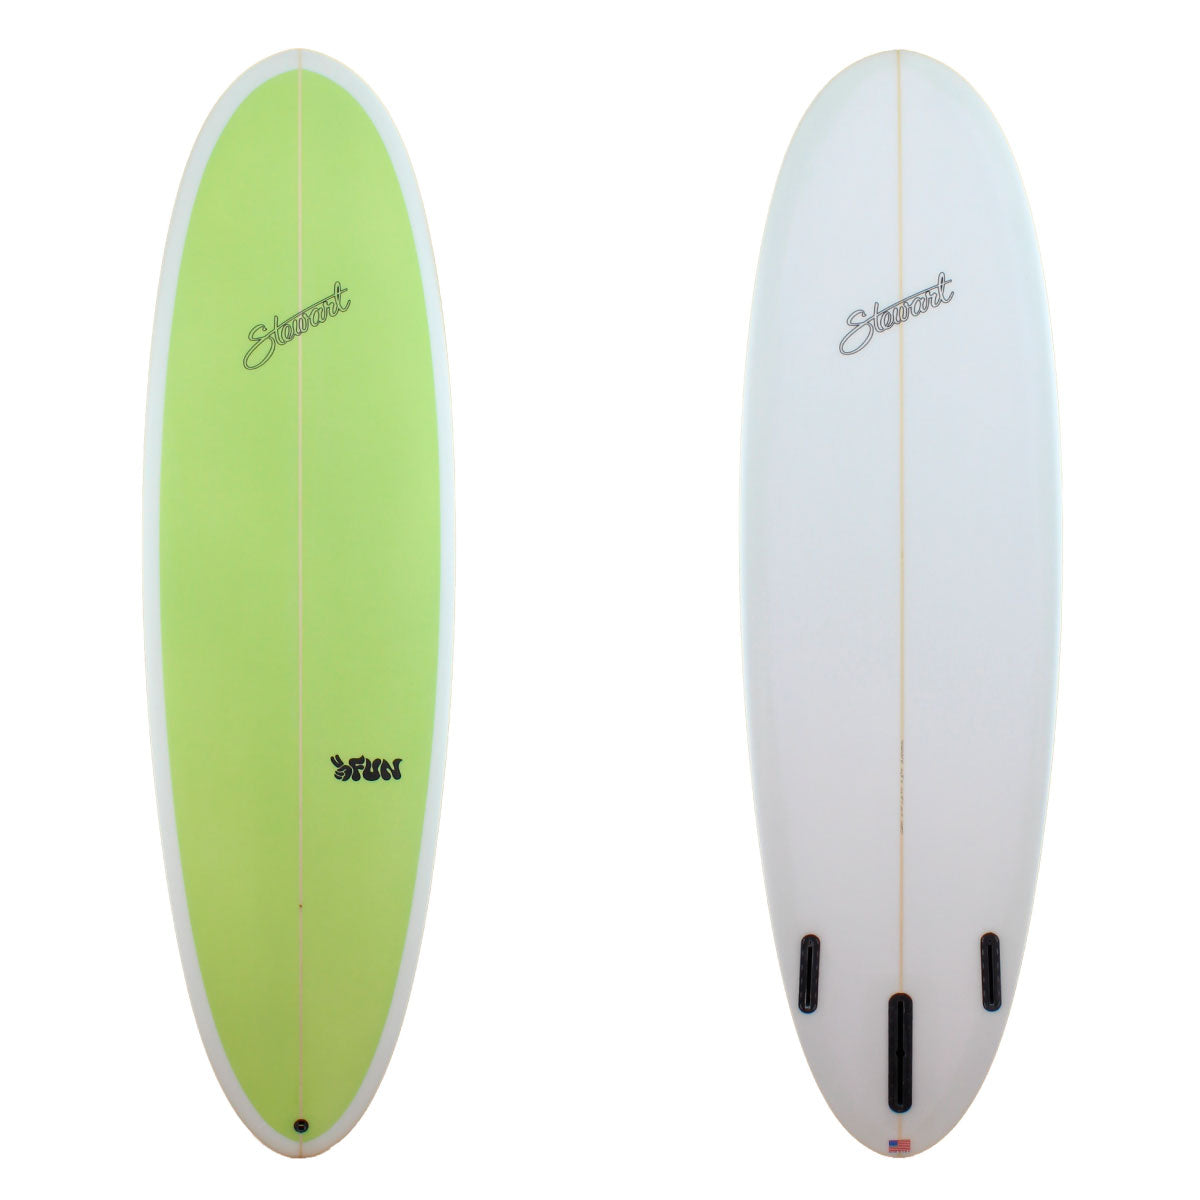 Stewart Surfboards 6'10" 2FUN mid-length surfboard with painted solid light green deck and white bottom